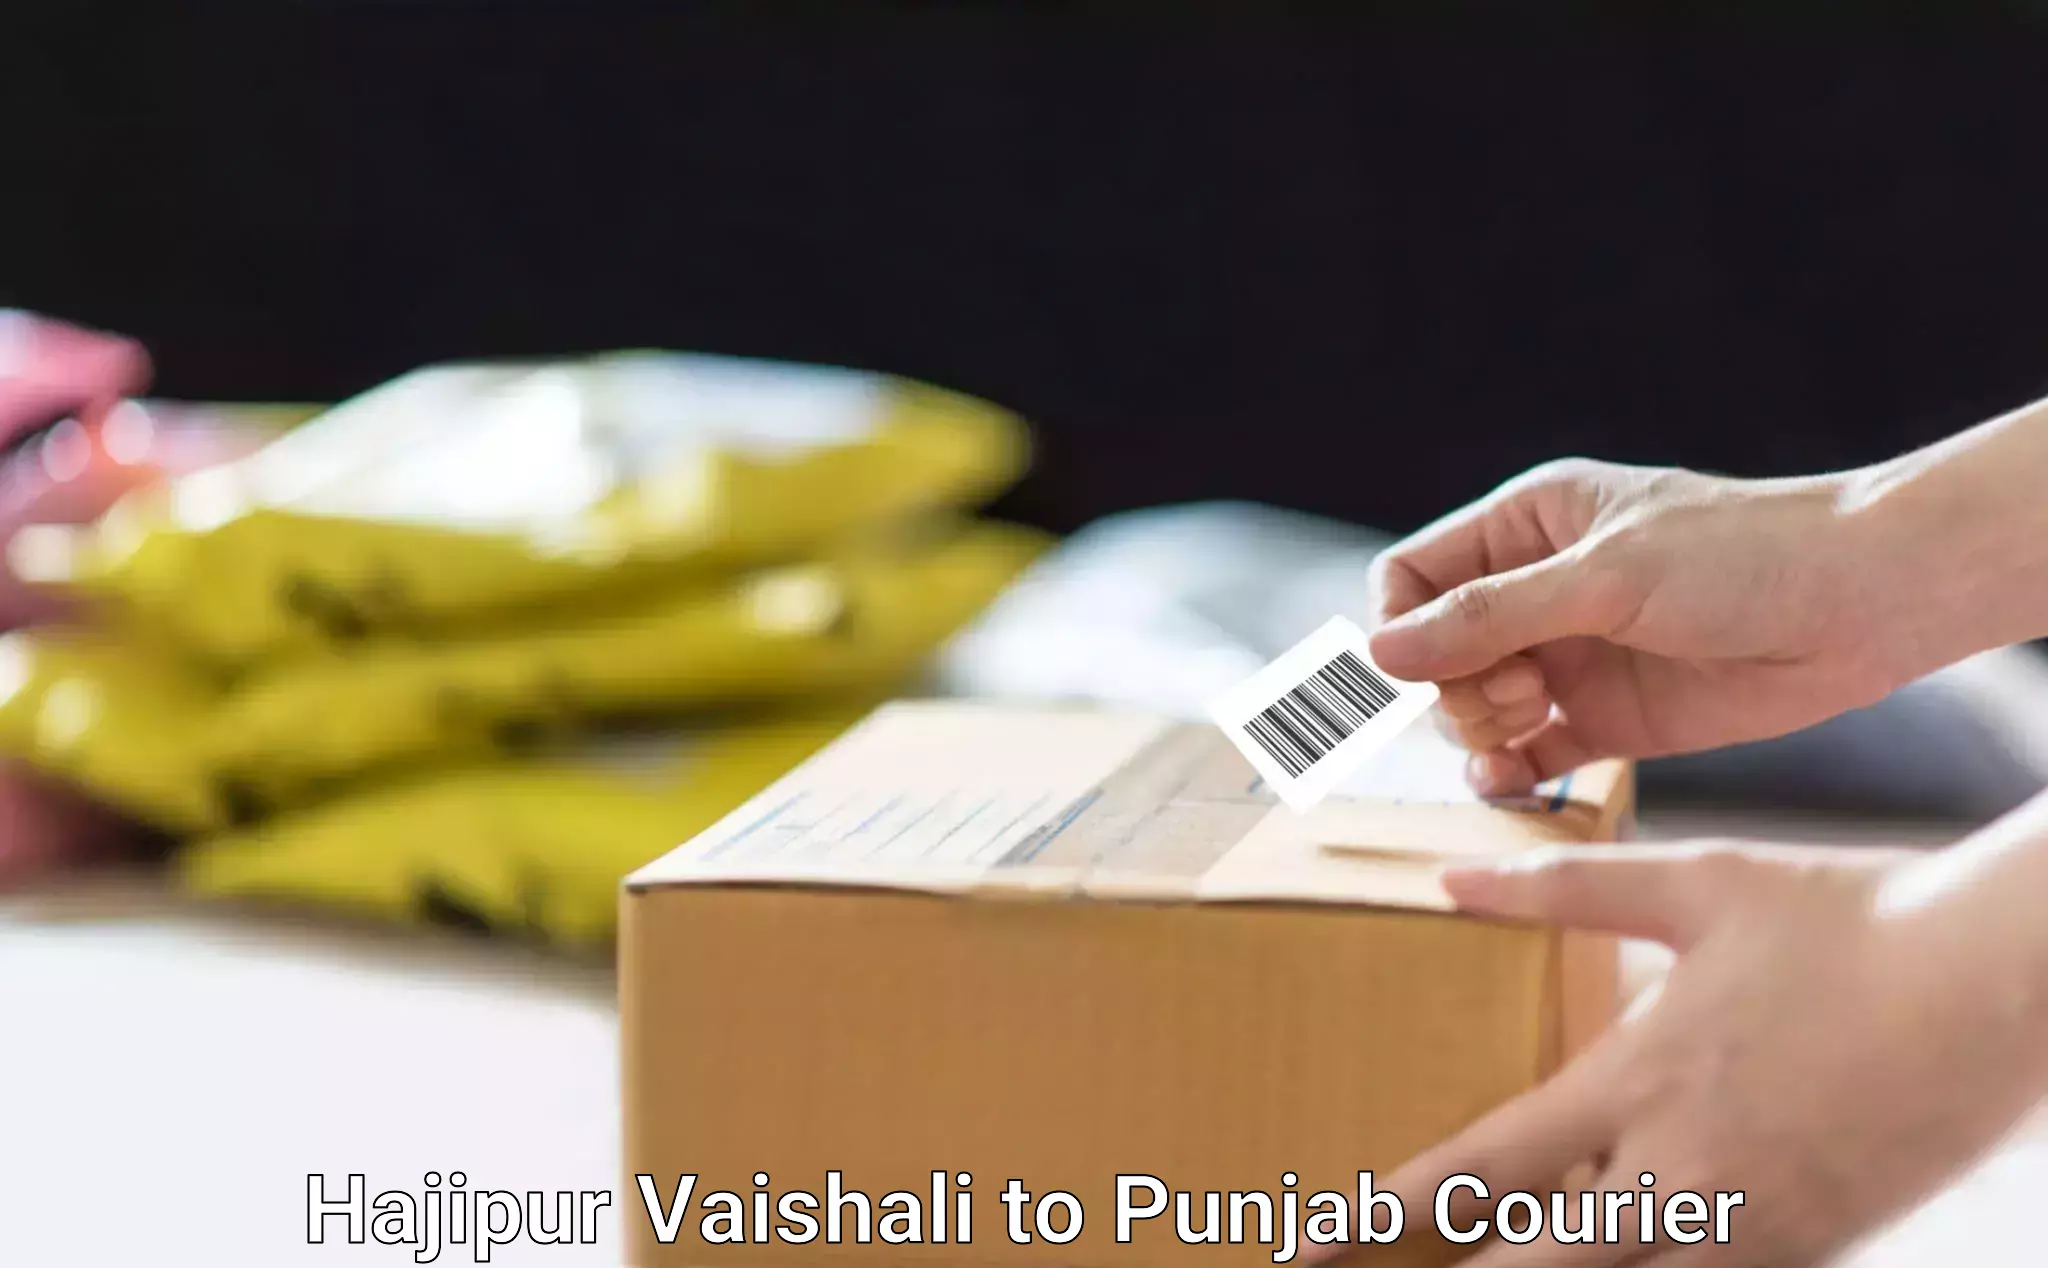 Furniture moving specialists Hajipur Vaishali to Ropar